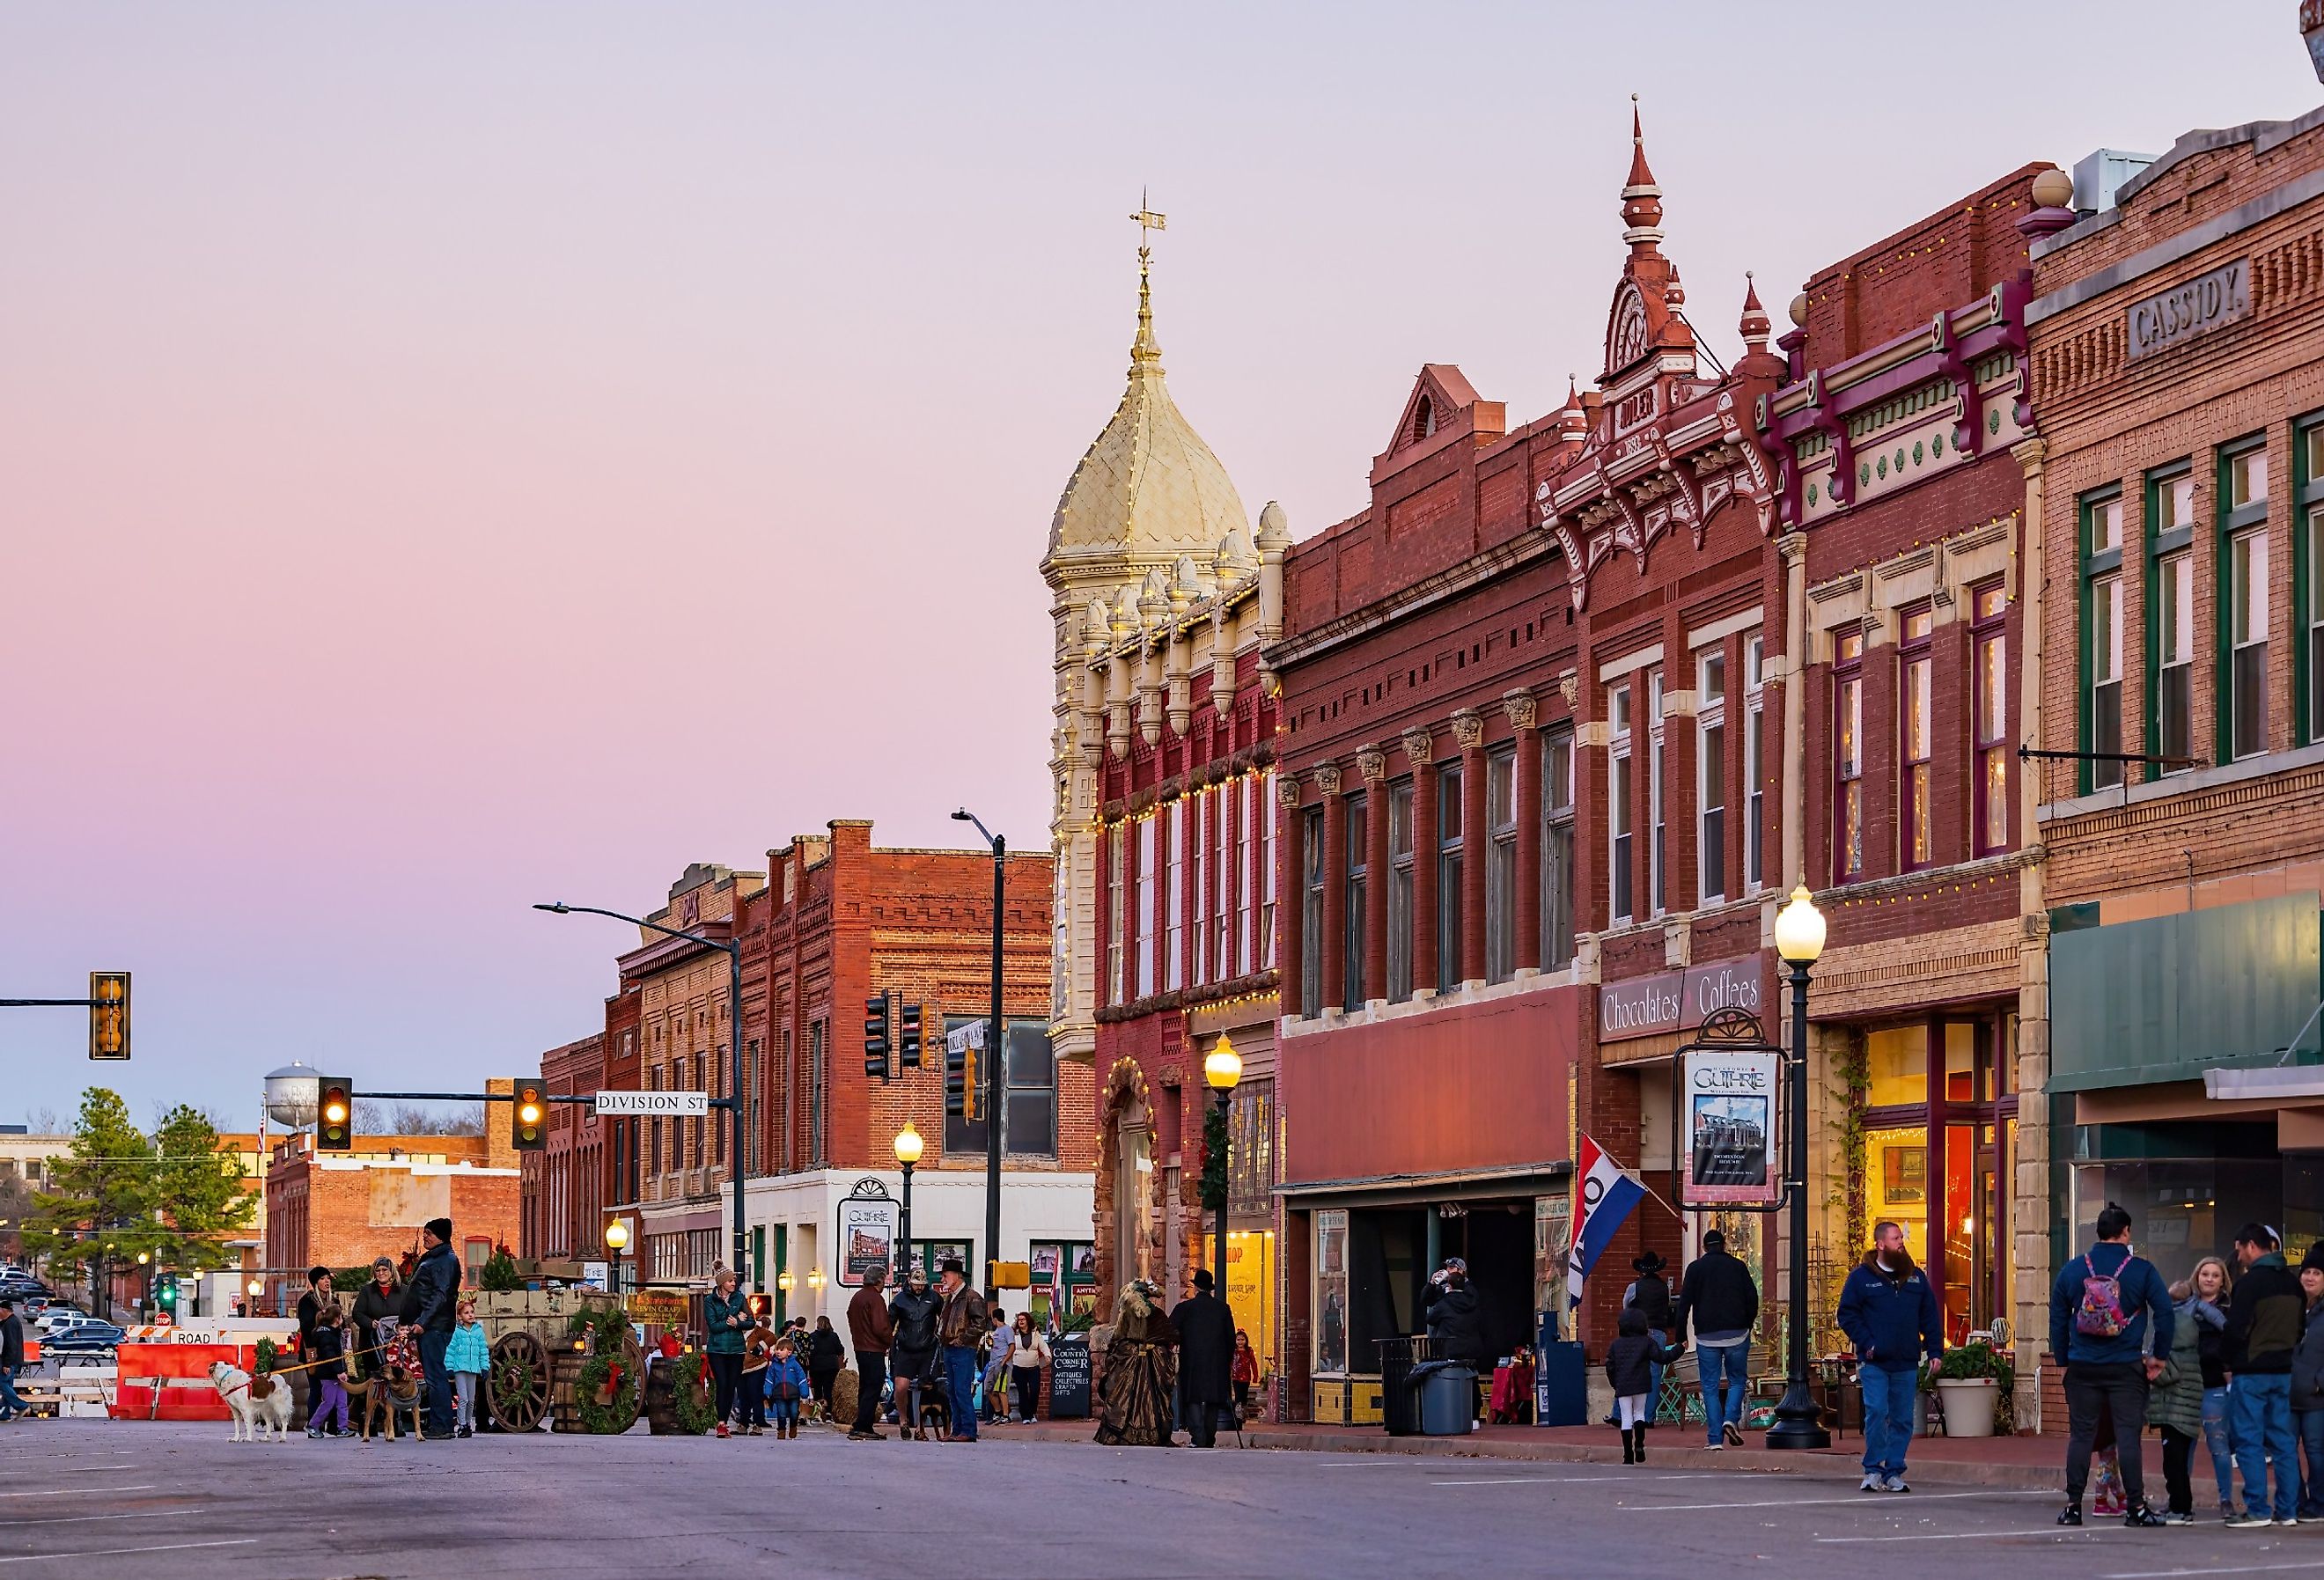 Historical downtown of Guthrie, Oklahoma at night. Image credit Kit Leong via Shutterstock